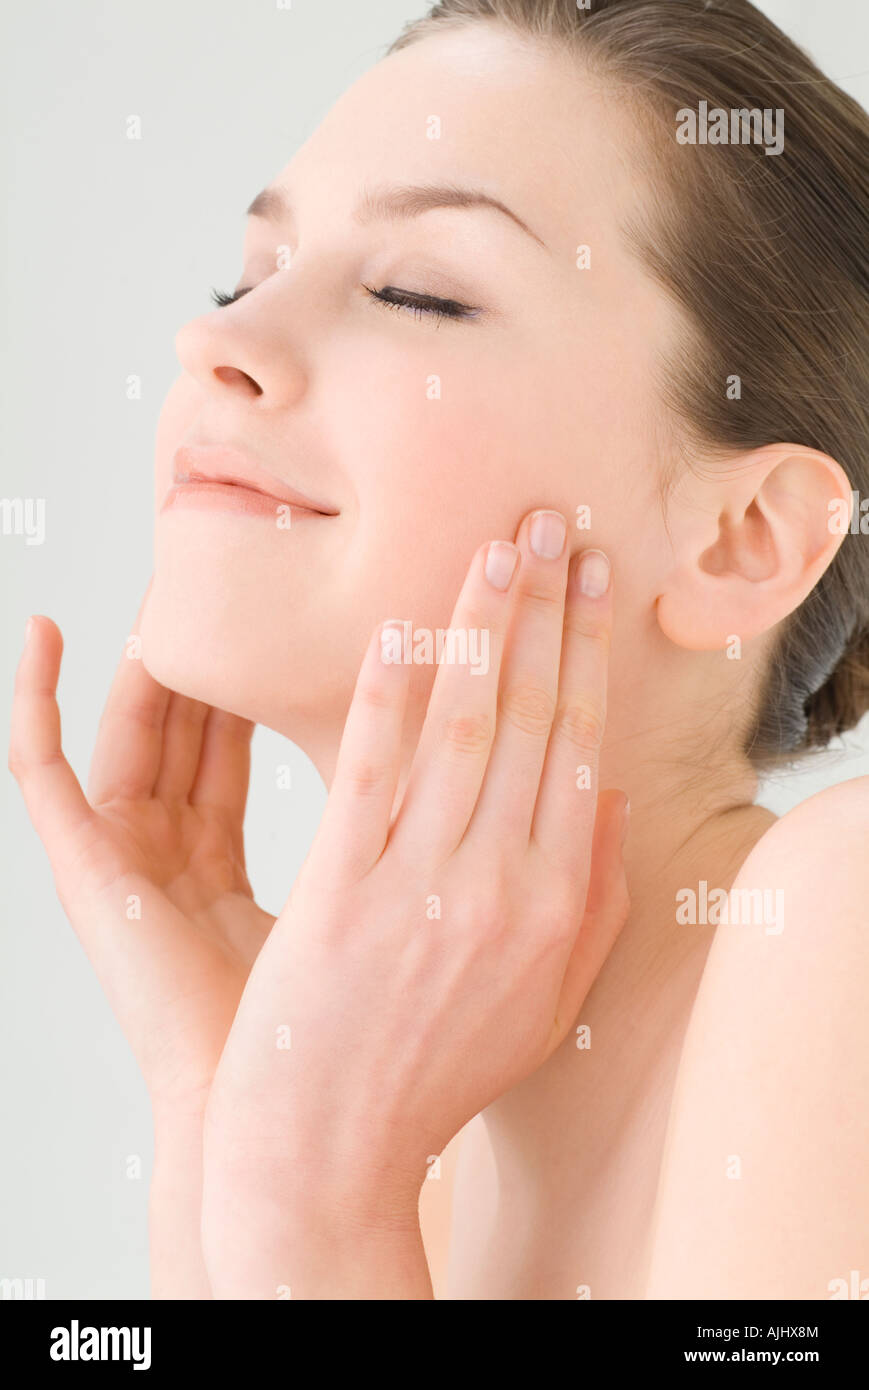 Young woman touching her cheeks Stock Photo